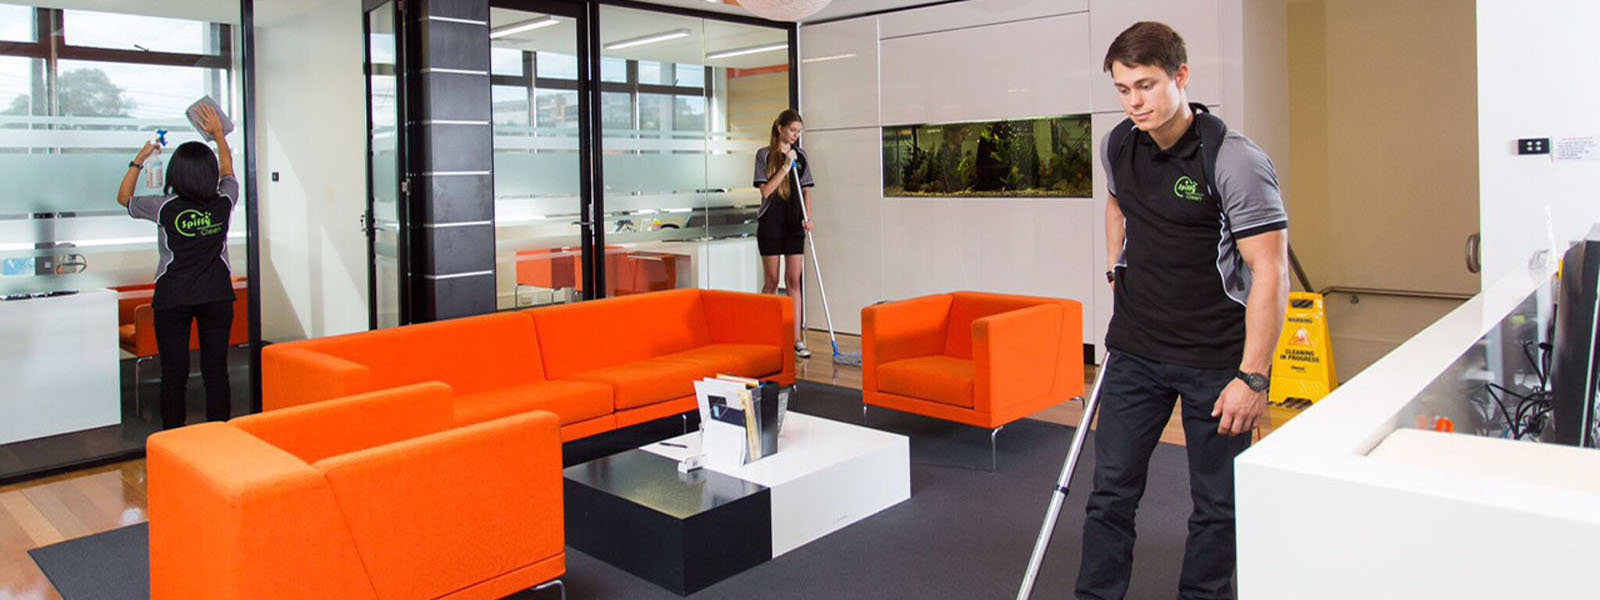 Why to hire office cleaning services?